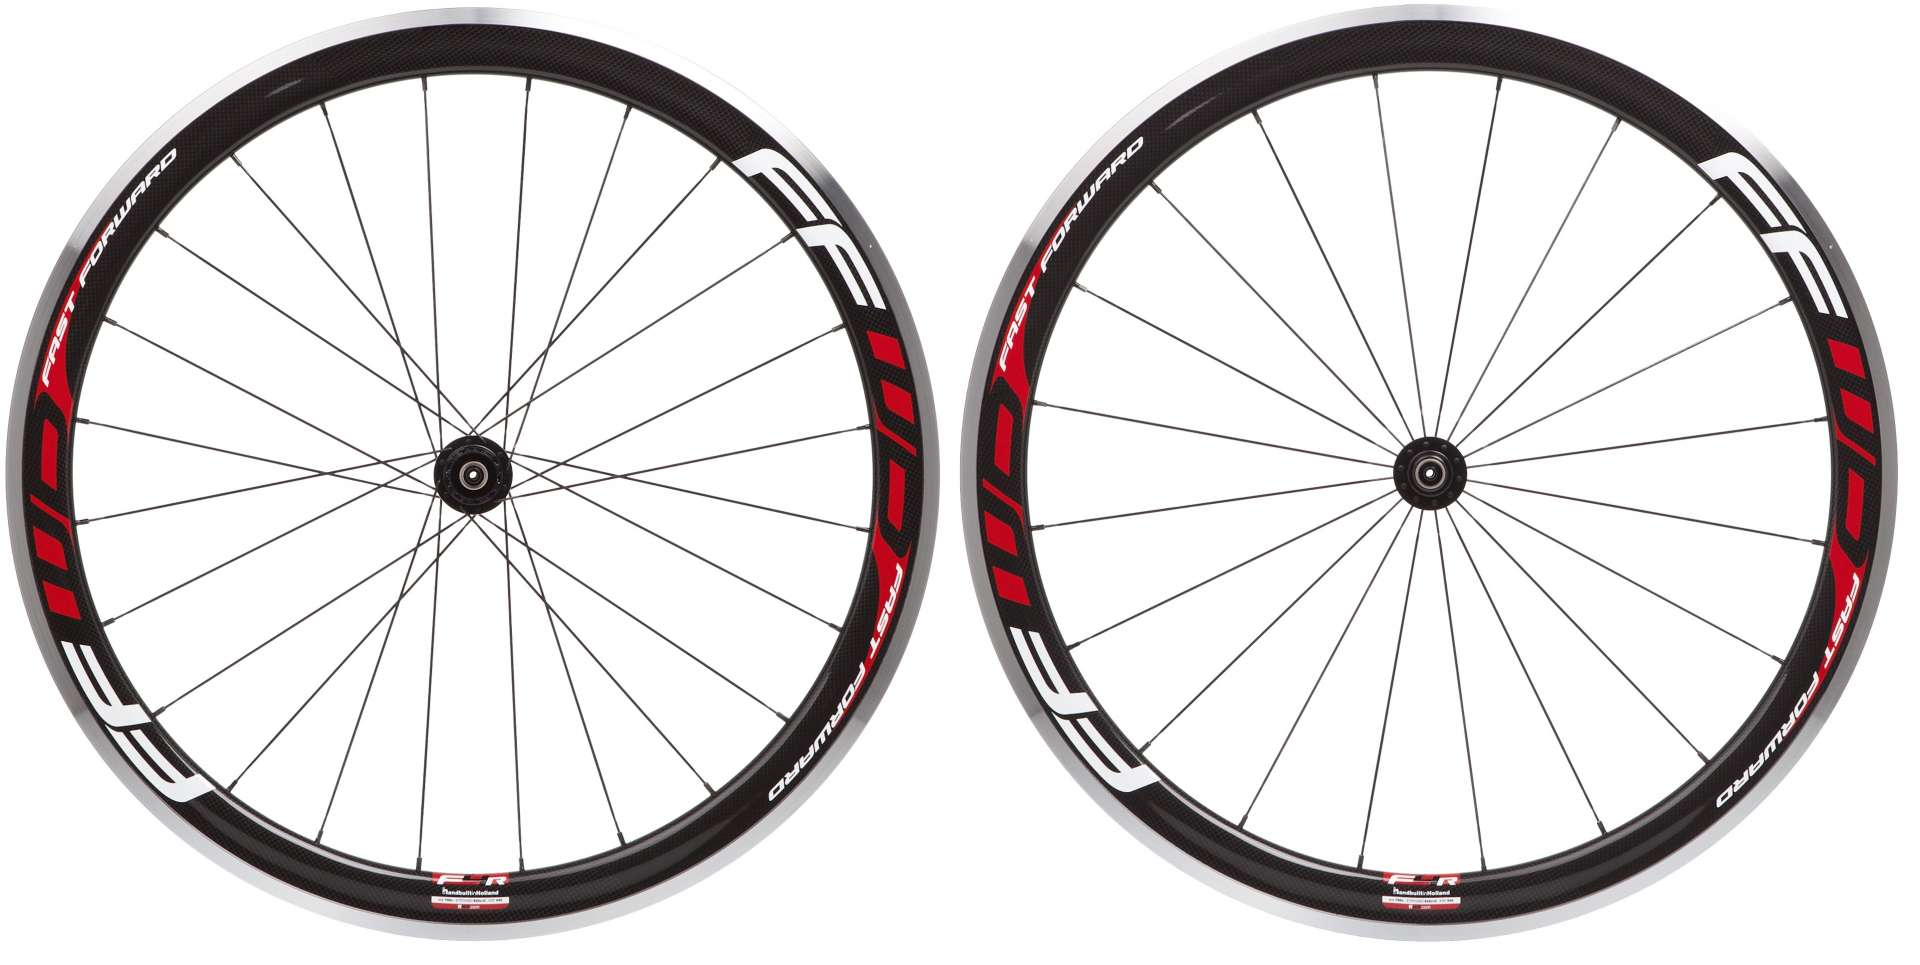 Fast Forward F4R Carbon Alloy Clincher Wielset met DT Swiss 240s Naaf